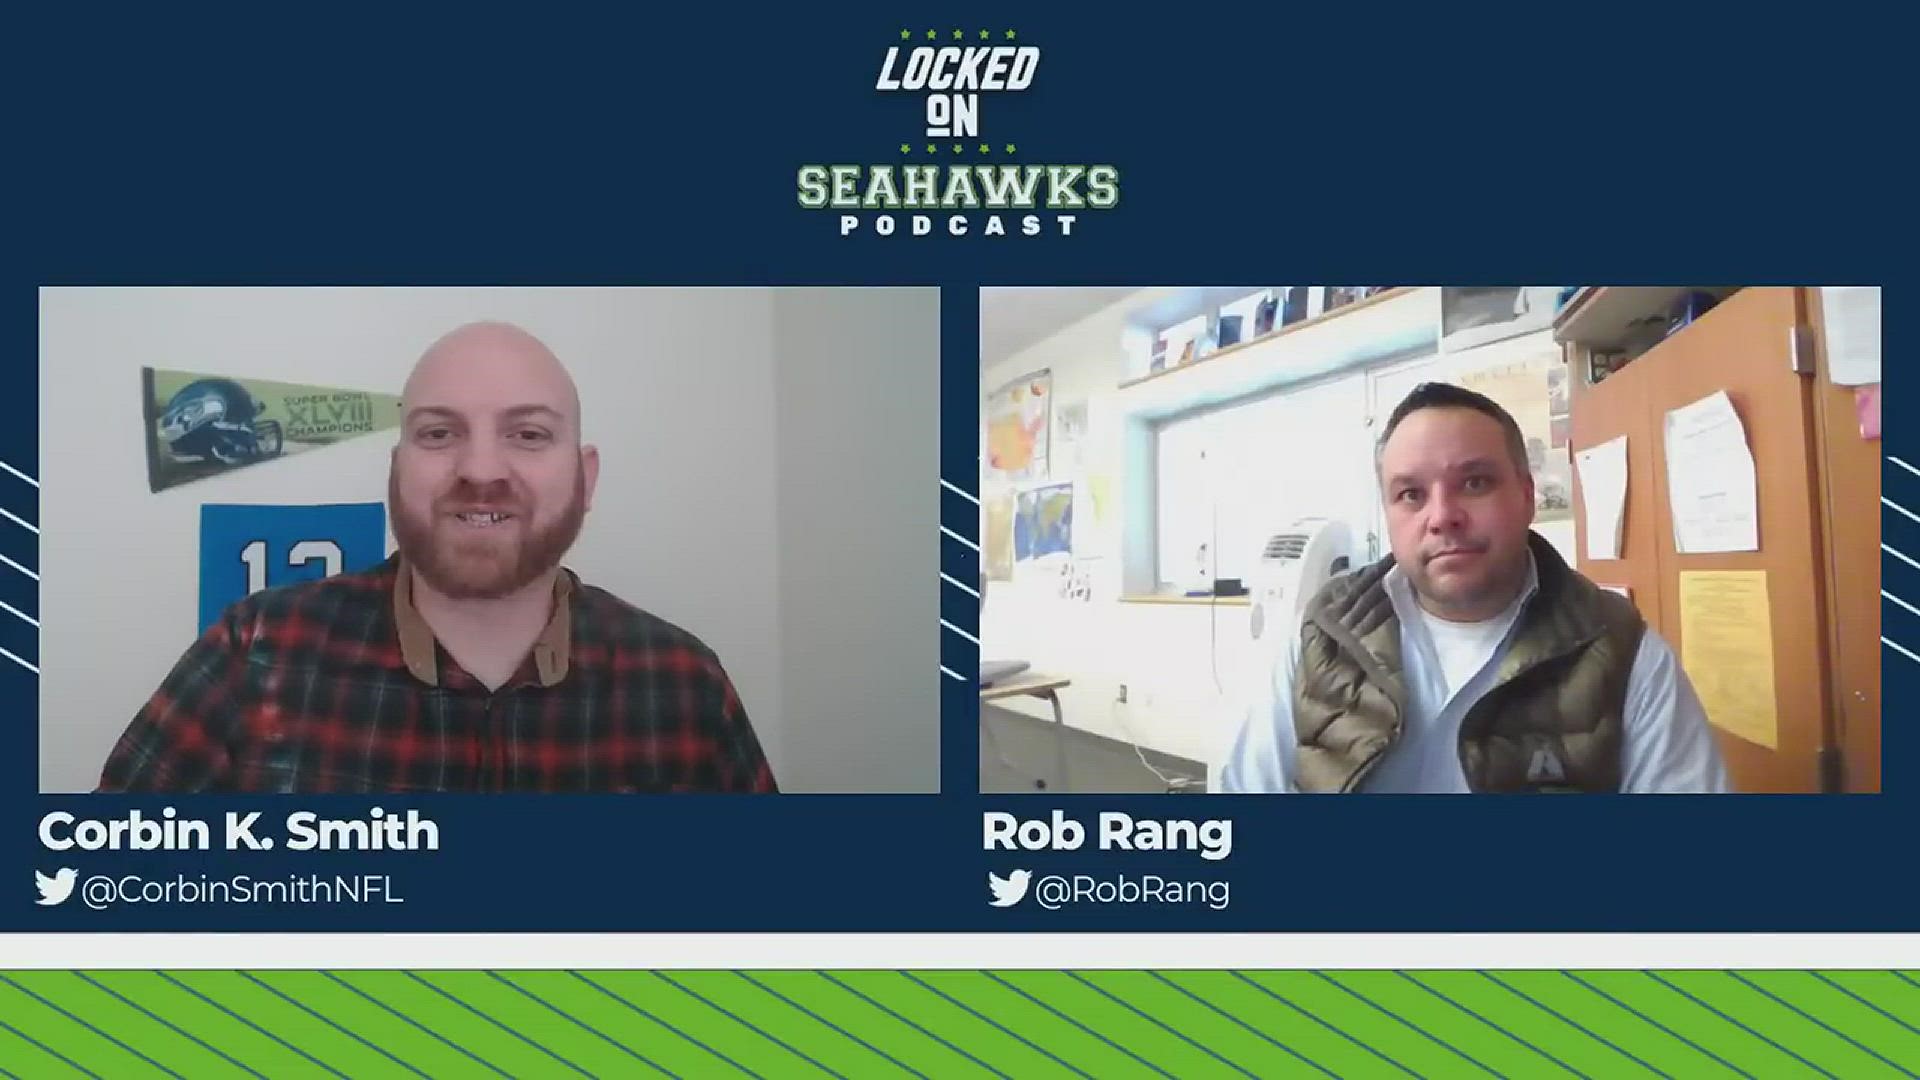 Hosts Corbin Smith and Rob Rang look back historically at how underdogs have fared in similar situations and whether or not past precedent bodes well for Seattle.